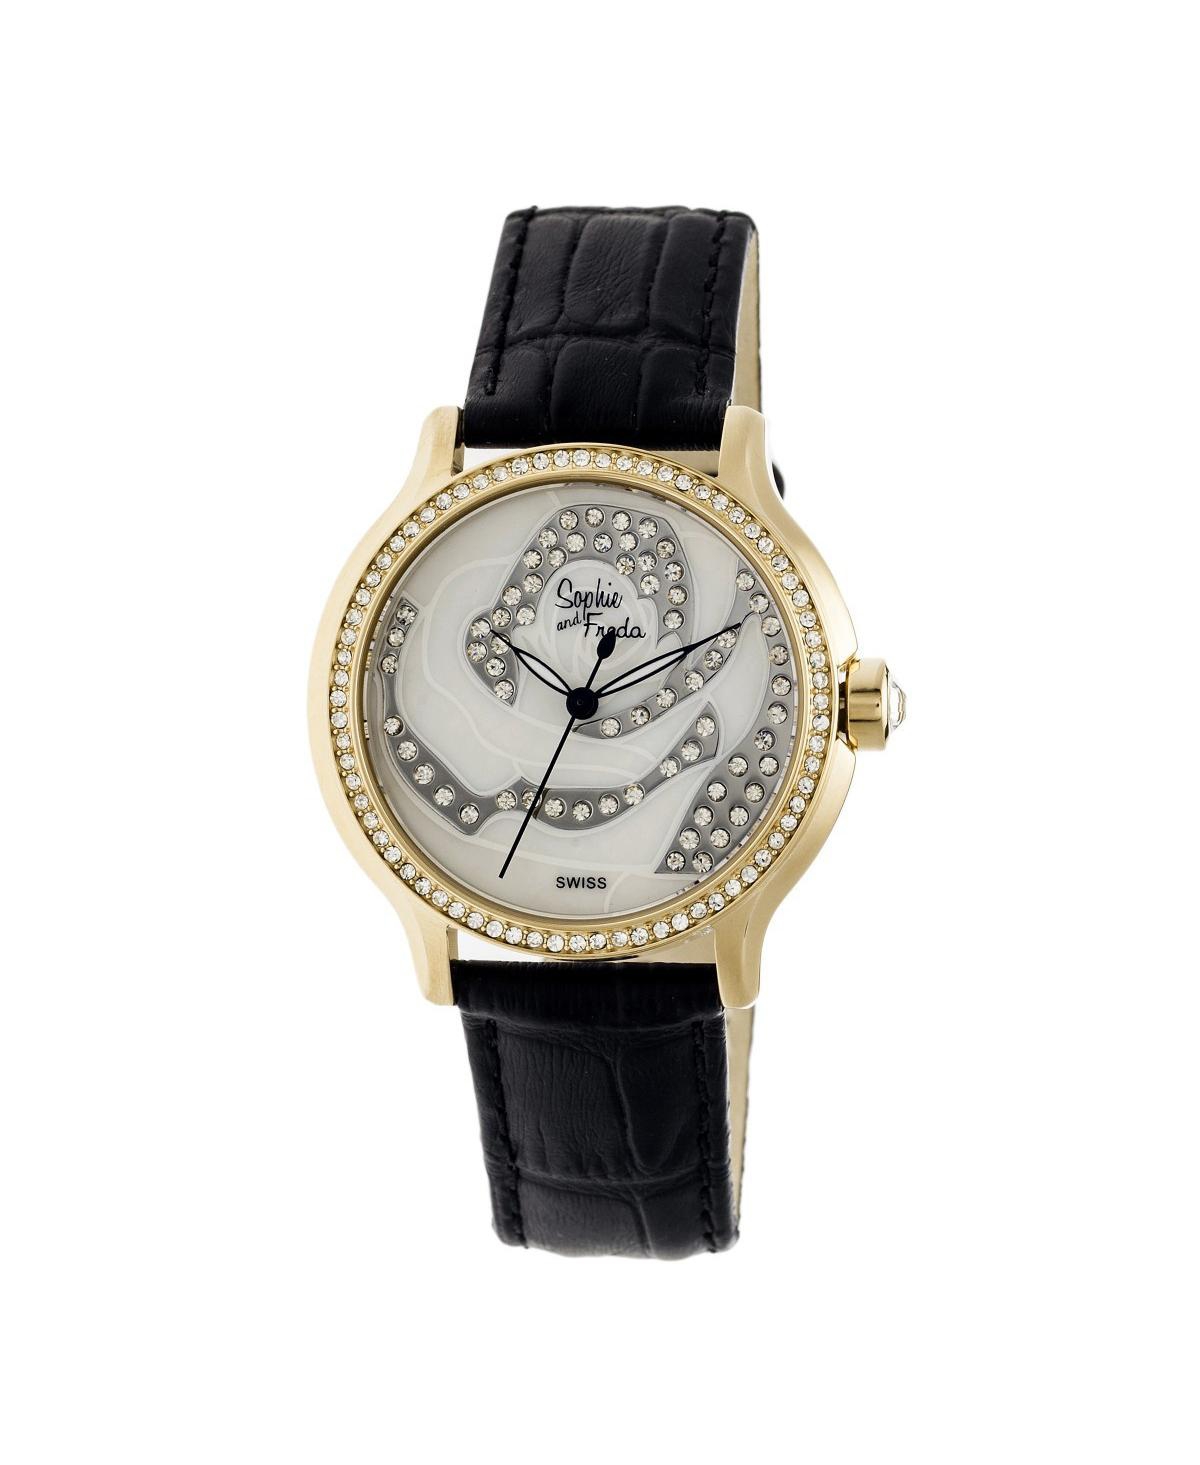 Sophie And Freda Women Monaco Leather Watch - Gold/black, 38mm